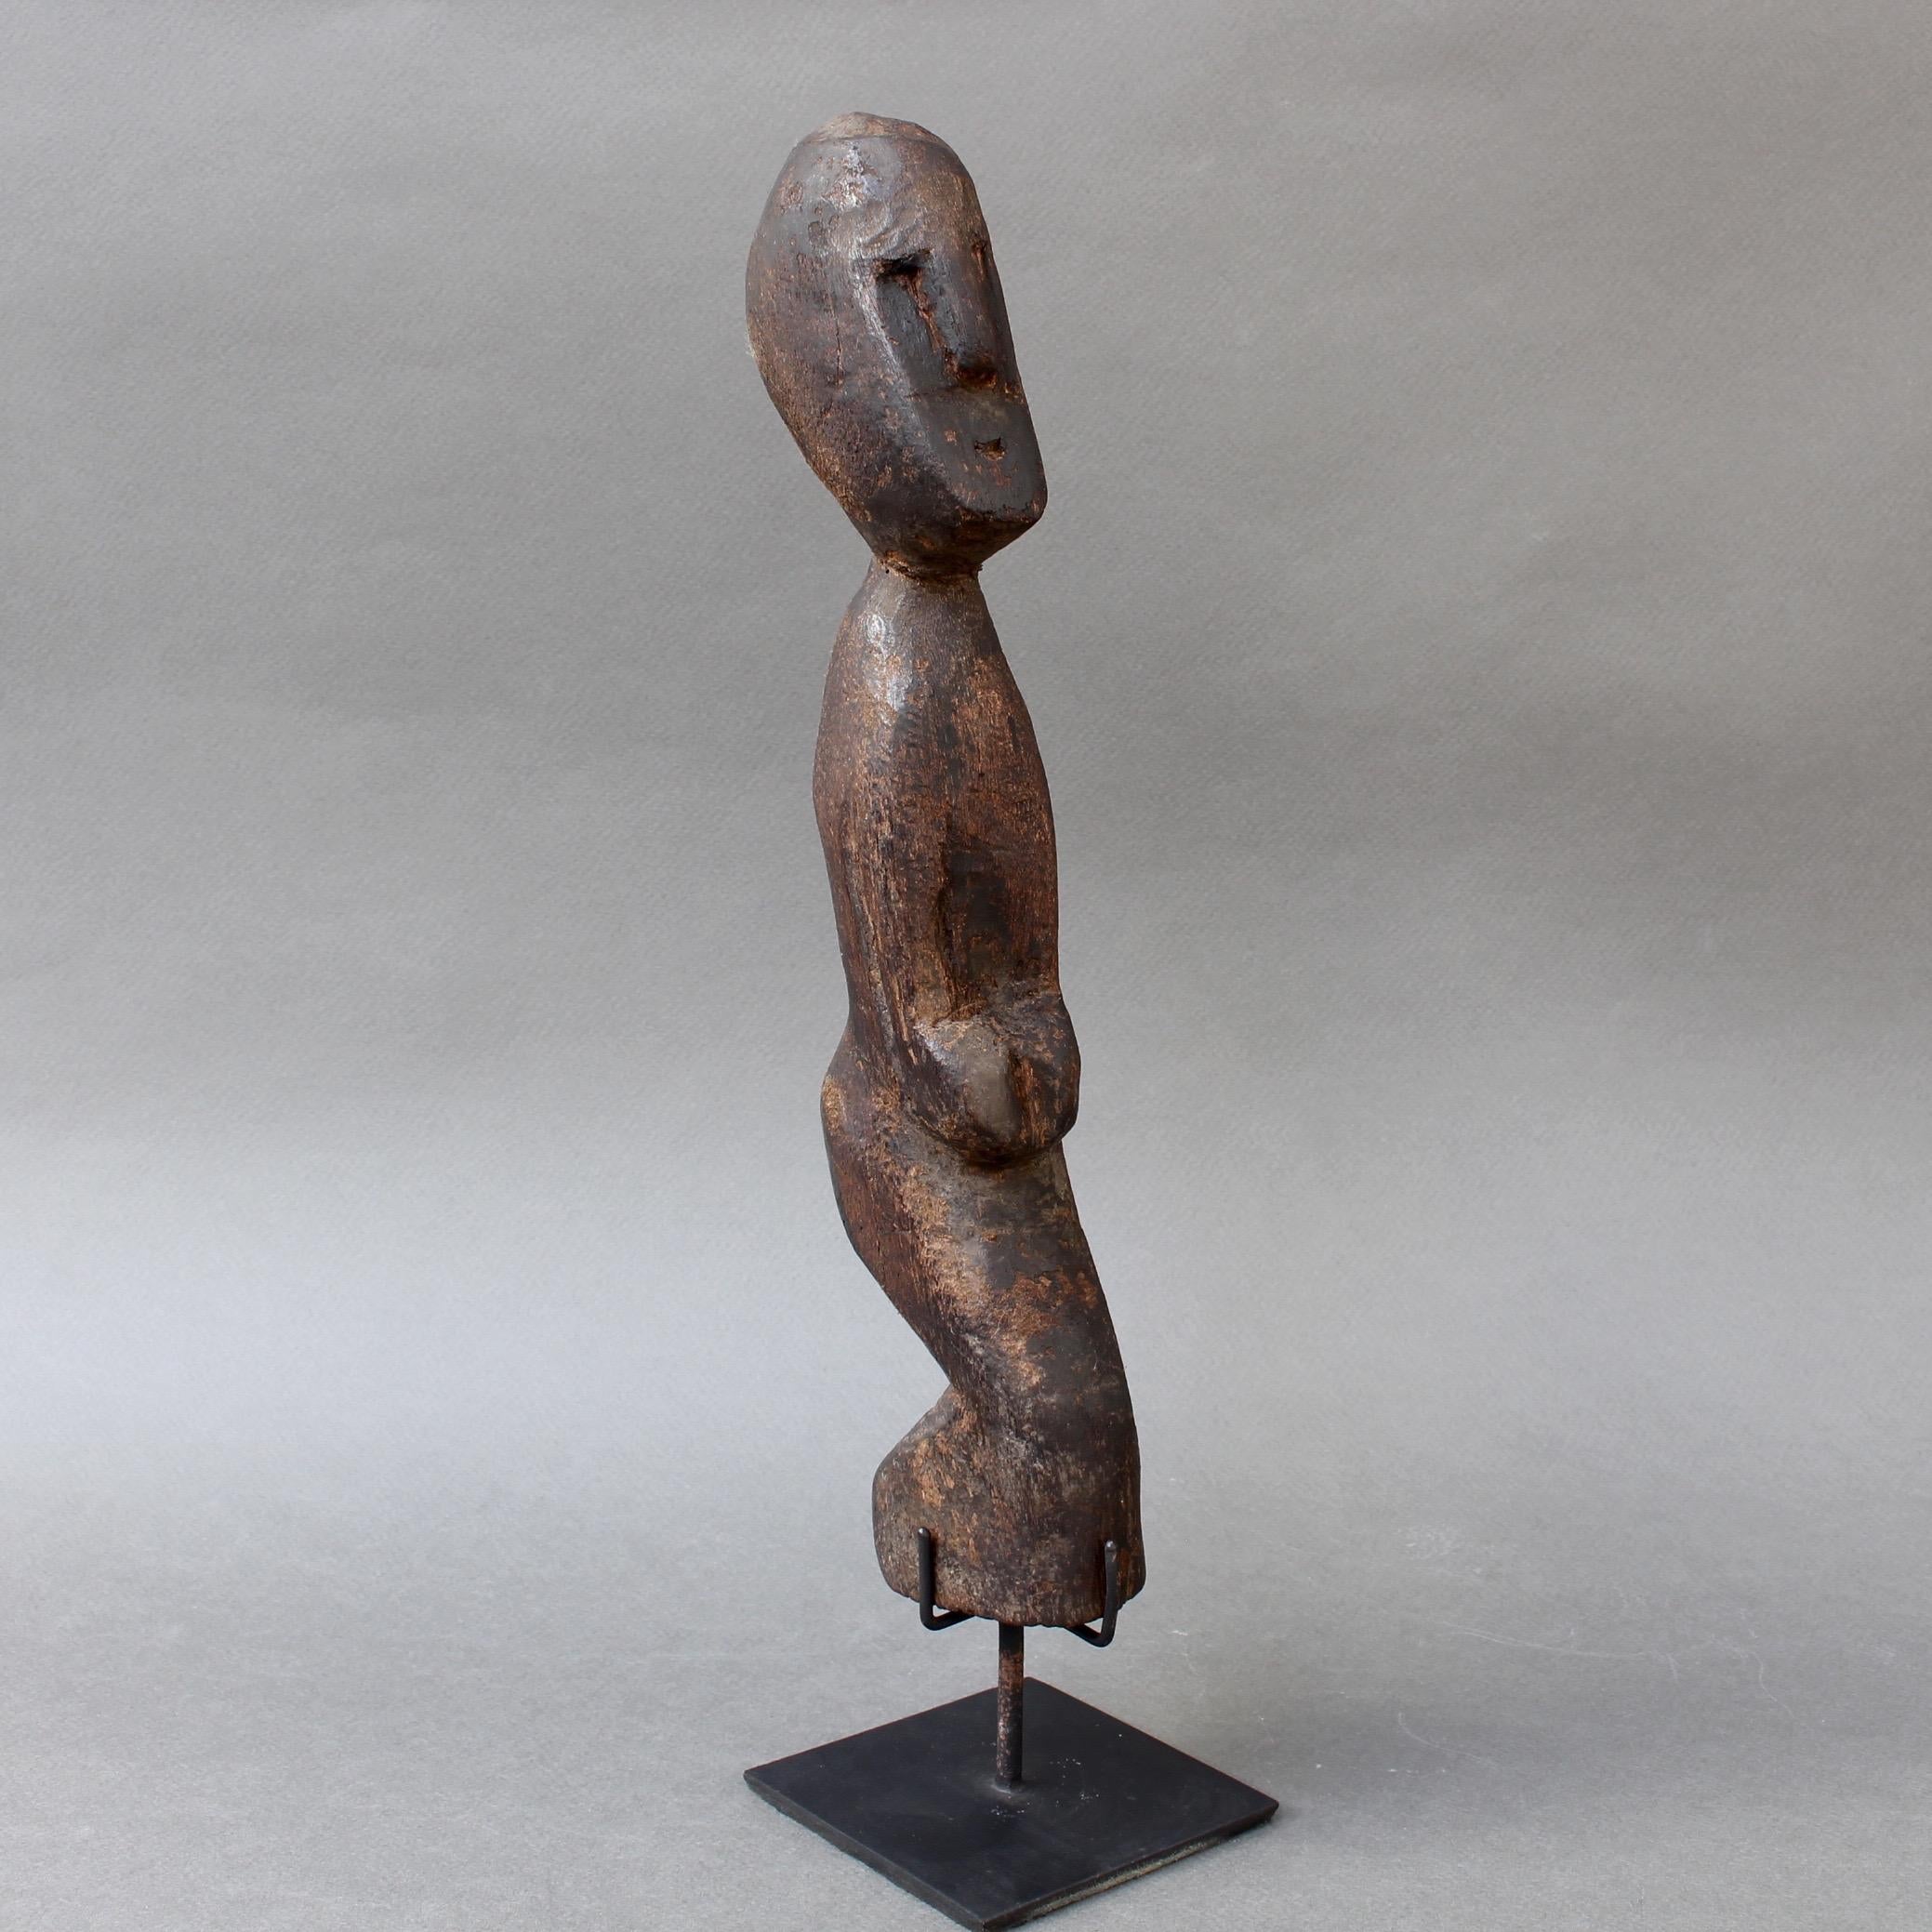 Tribal Wooden Carving / Sculpture of Kneeling Wooden Figure from Timor, Indonesia